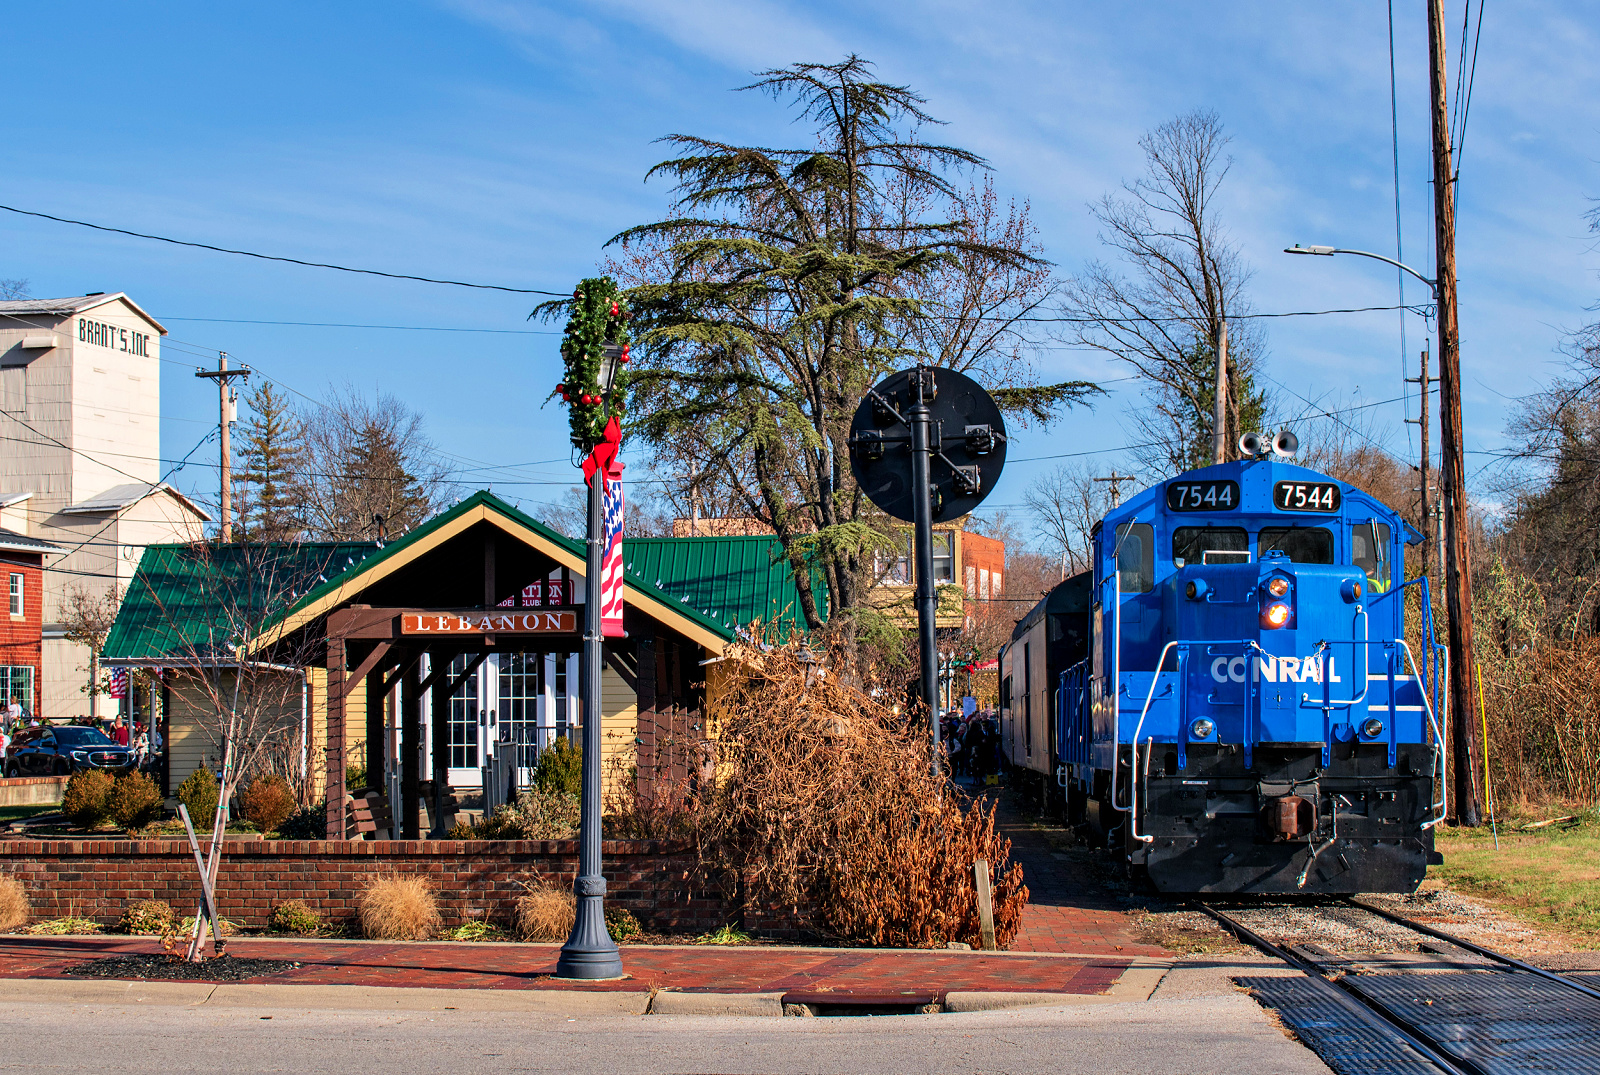 CRC 7544 is a class EMD GP10 and  is pictured in Lebanon, OH, United States.  This was taken along the LM&M Railroad on the Cincinnati Railway. Photo Copyright: David Rohdenburg uploaded to Railroad Gallery on 12/02/2022. This photograph of CRC 7544 was taken on Saturday, November 26, 2022. All Rights Reserved. 